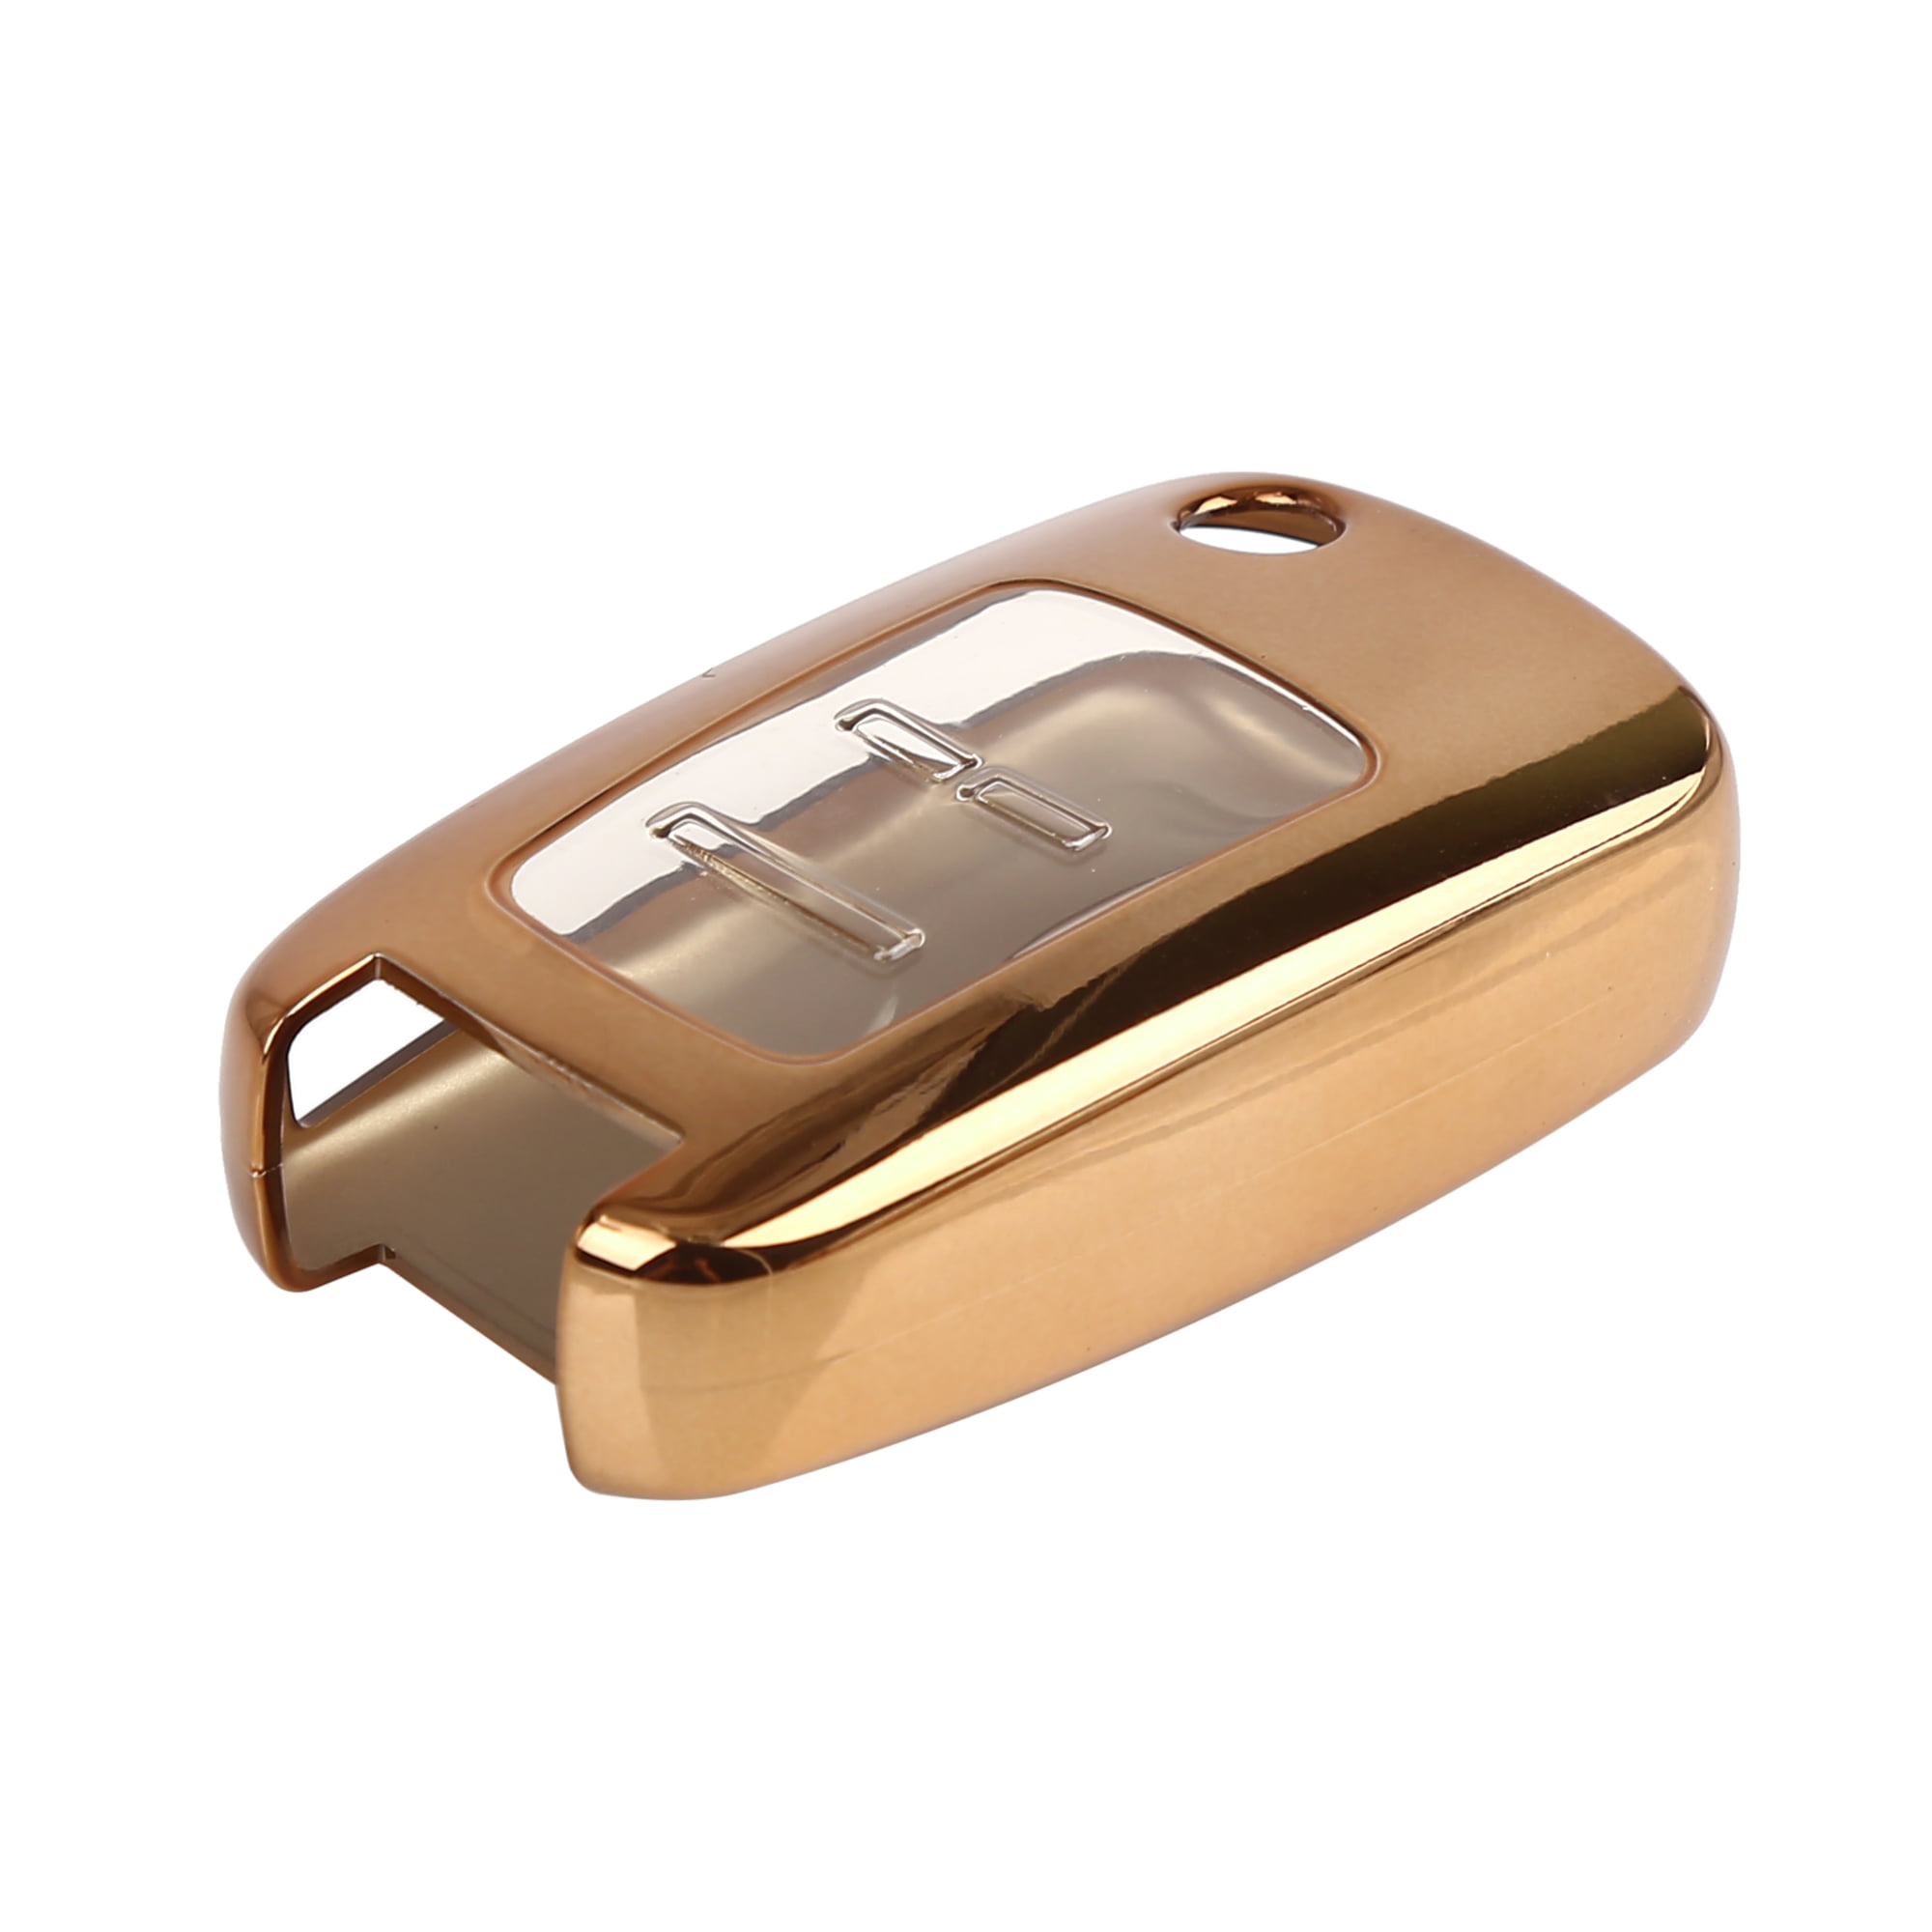 Gold TPU Smart Remote Key Shell Cover Case For Chevrolet GMC Buick 3 4 5 Button 